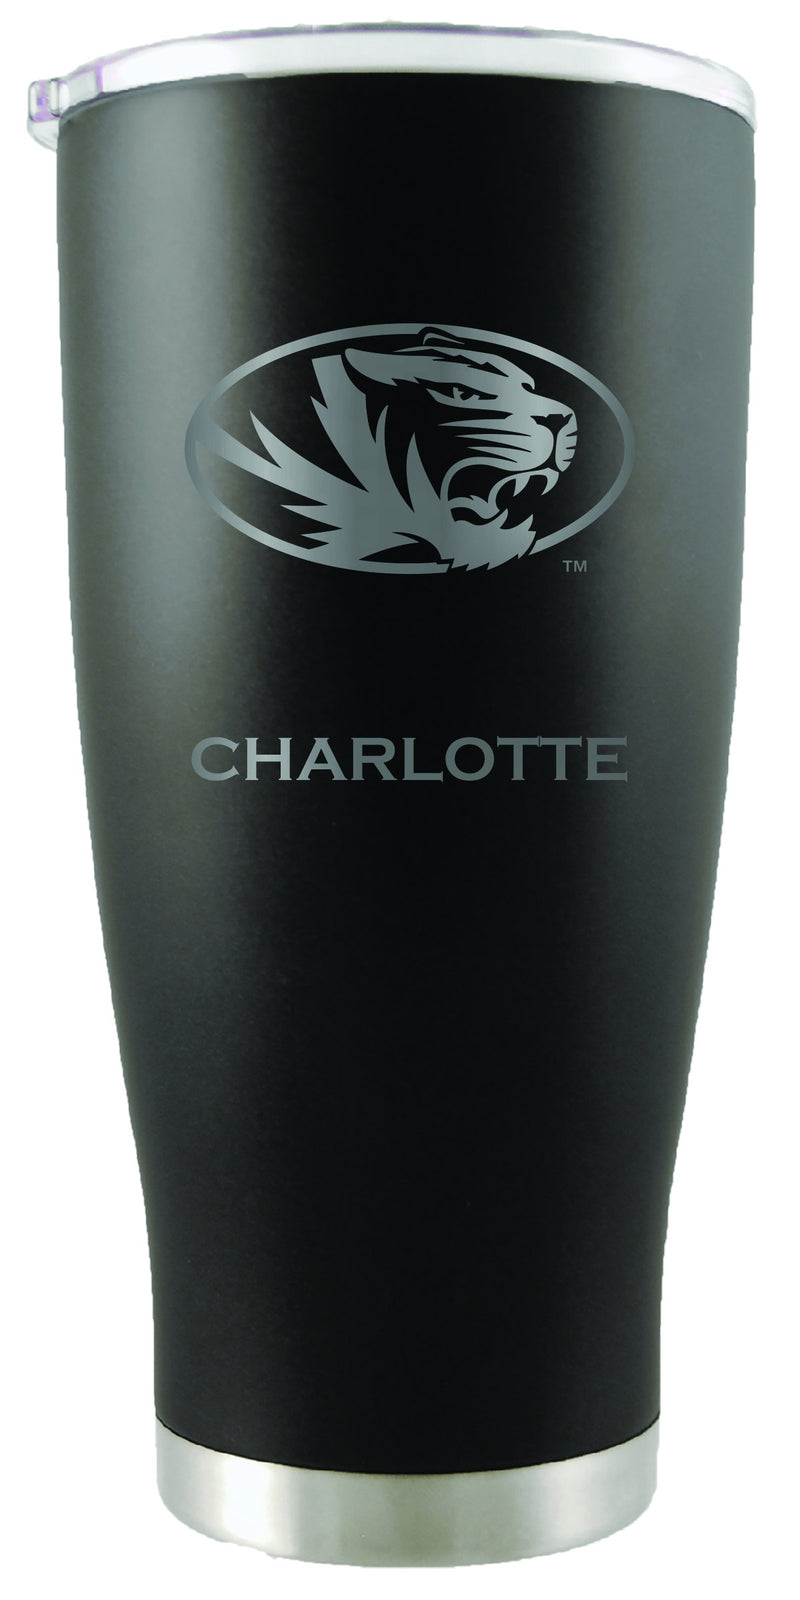 20oz Black Personalized Stainless Steel Tumbler | Missouri
COL, CurrentProduct, Drinkware_category_All, Missouri Tigers, MIZ, Personalized_Personalized
The Memory Company